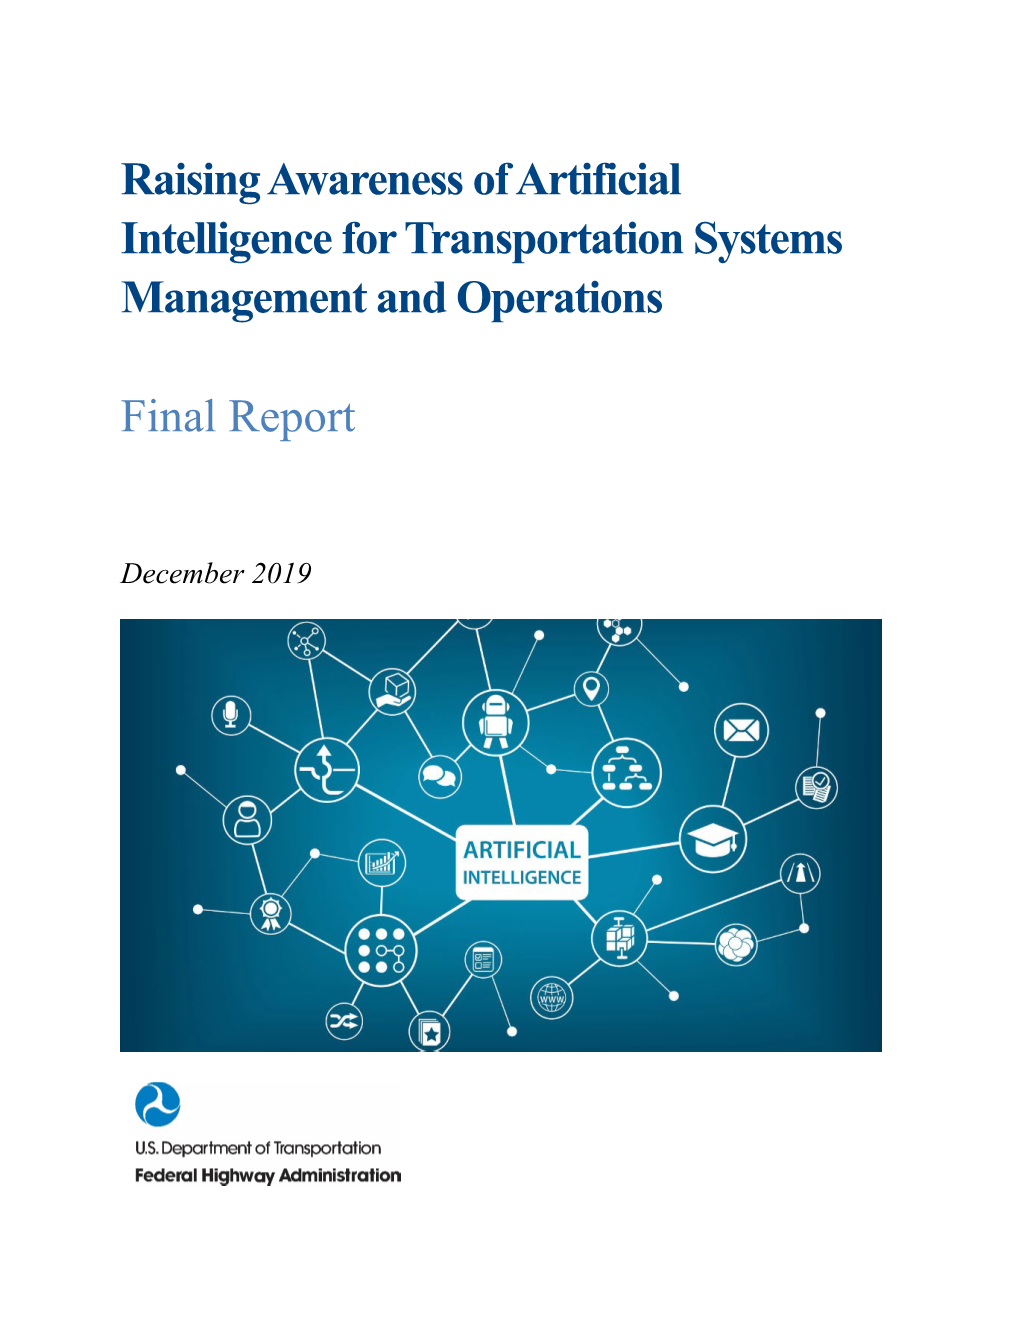 Raising Awareness of Artificial Intelligence for Transportation Systems Management and Operations Final Report